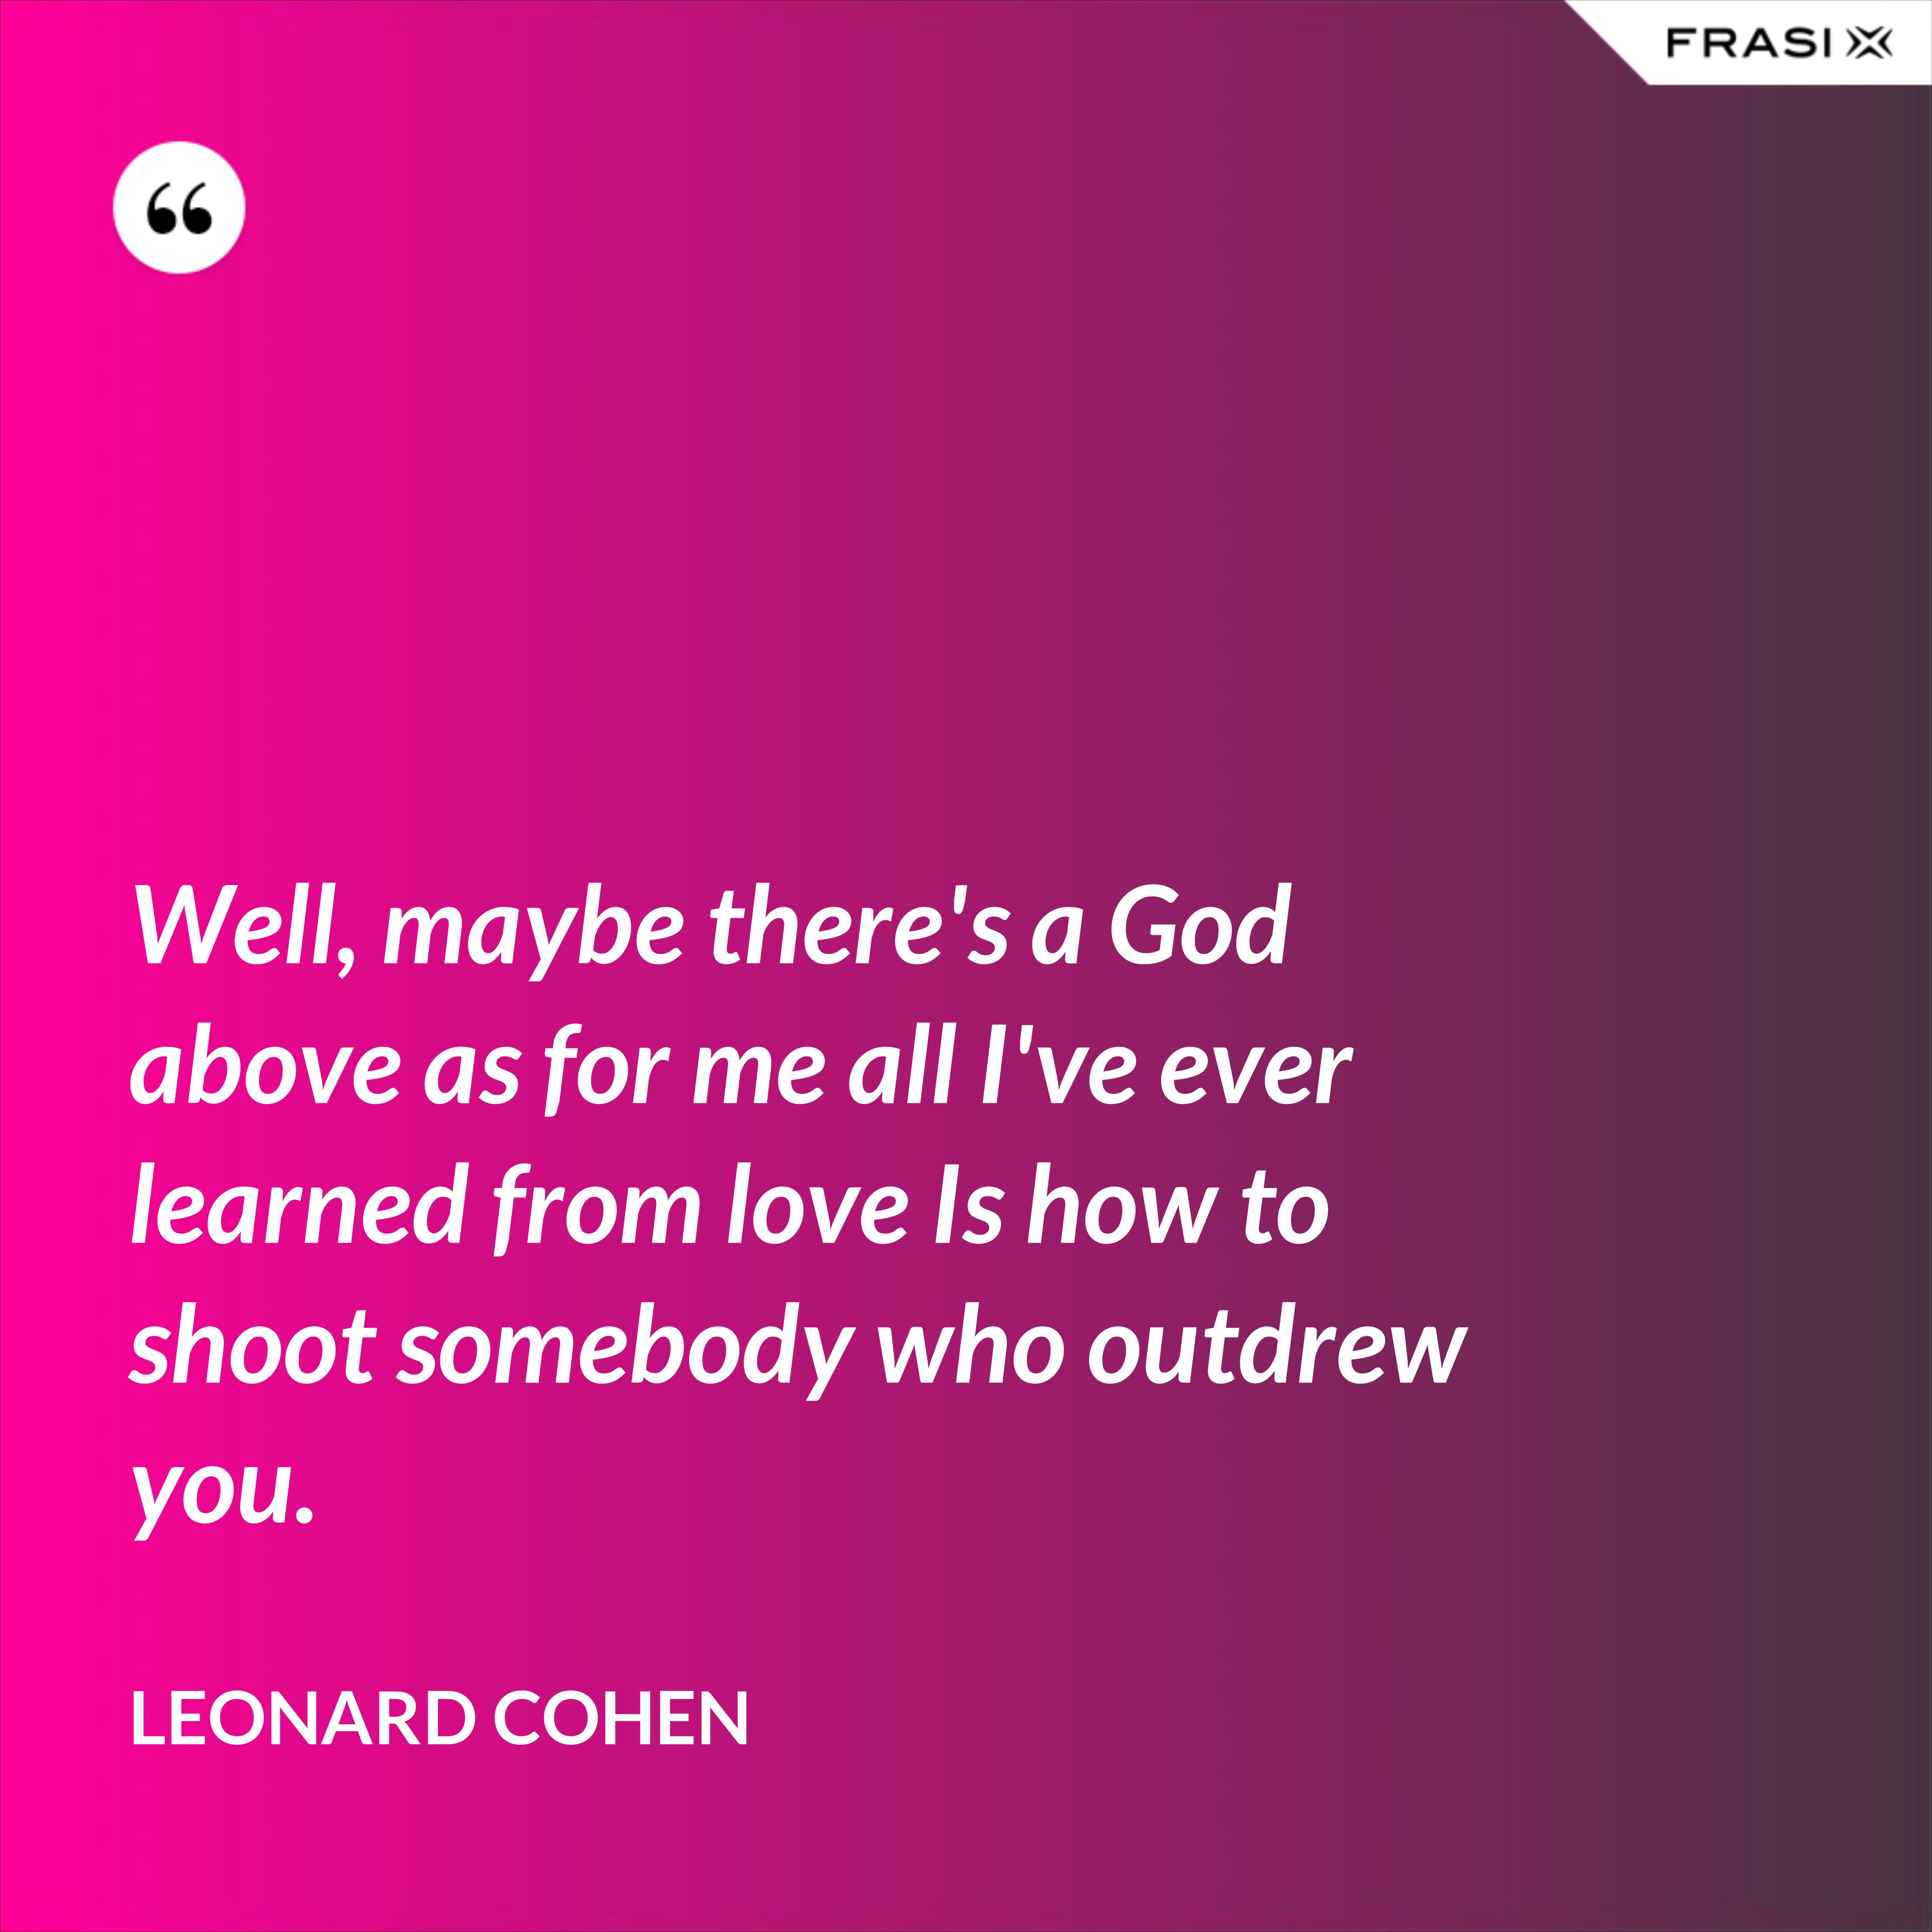 Well, maybe there's a God above as for me all I've ever learned from love Is how to shoot somebody who outdrew you. - Leonard Cohen